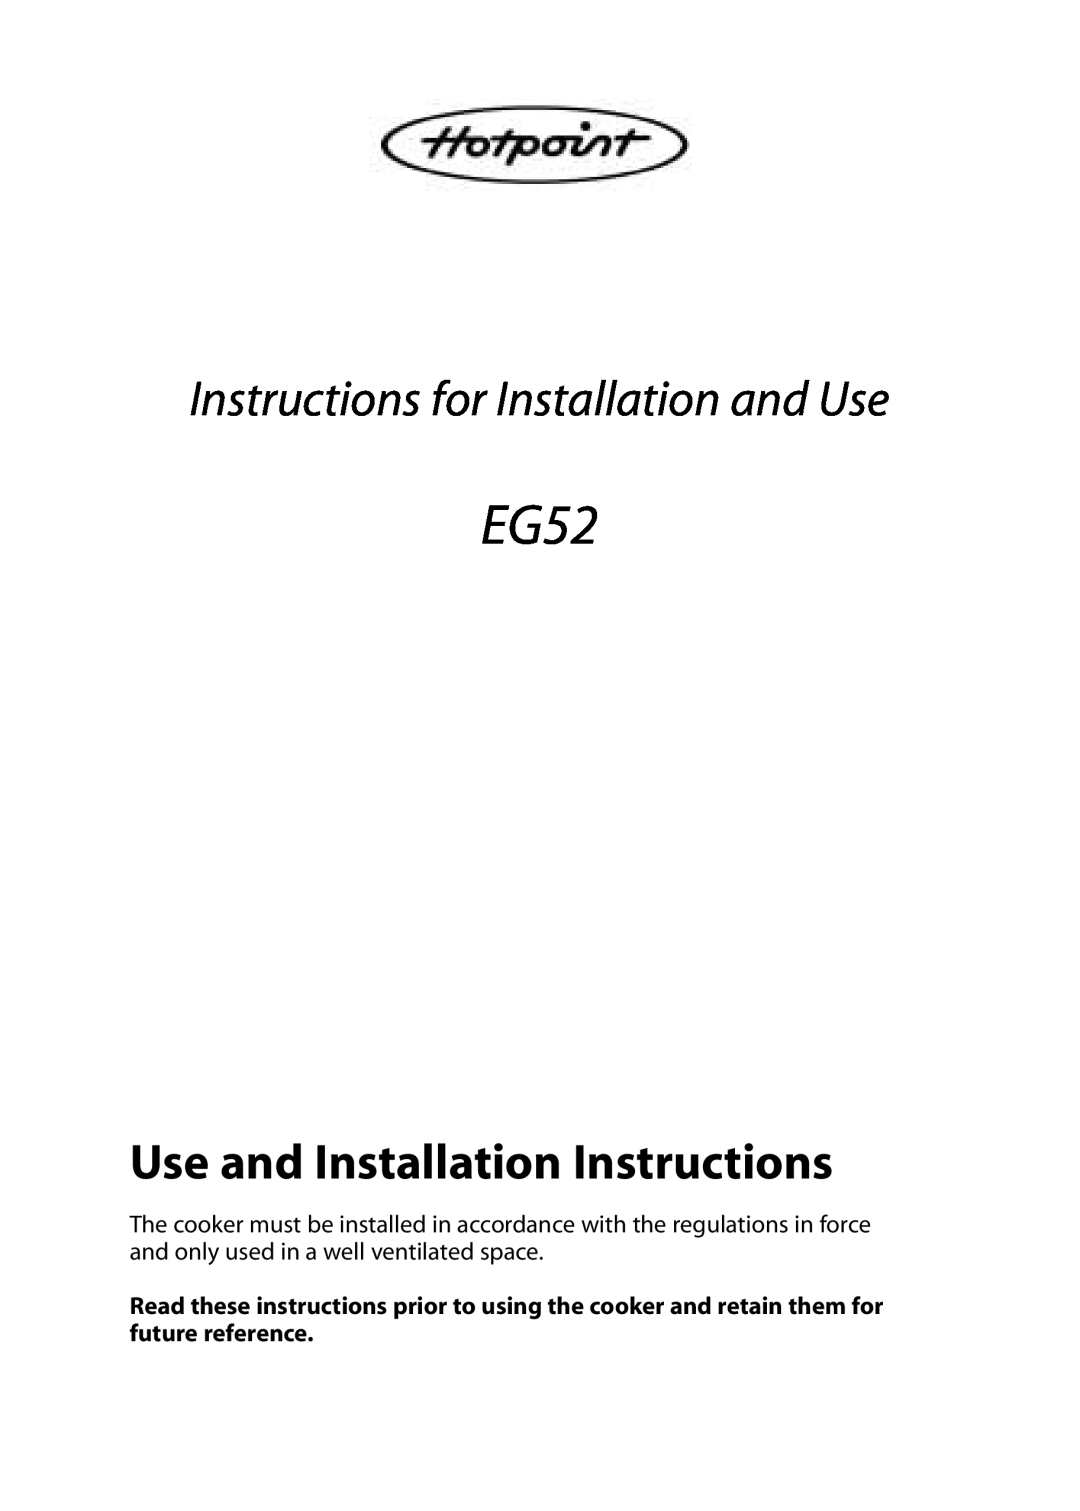 Hotpoint EG52 installation instructions Use and Installation Instructions, Instructions for Installation and Use 